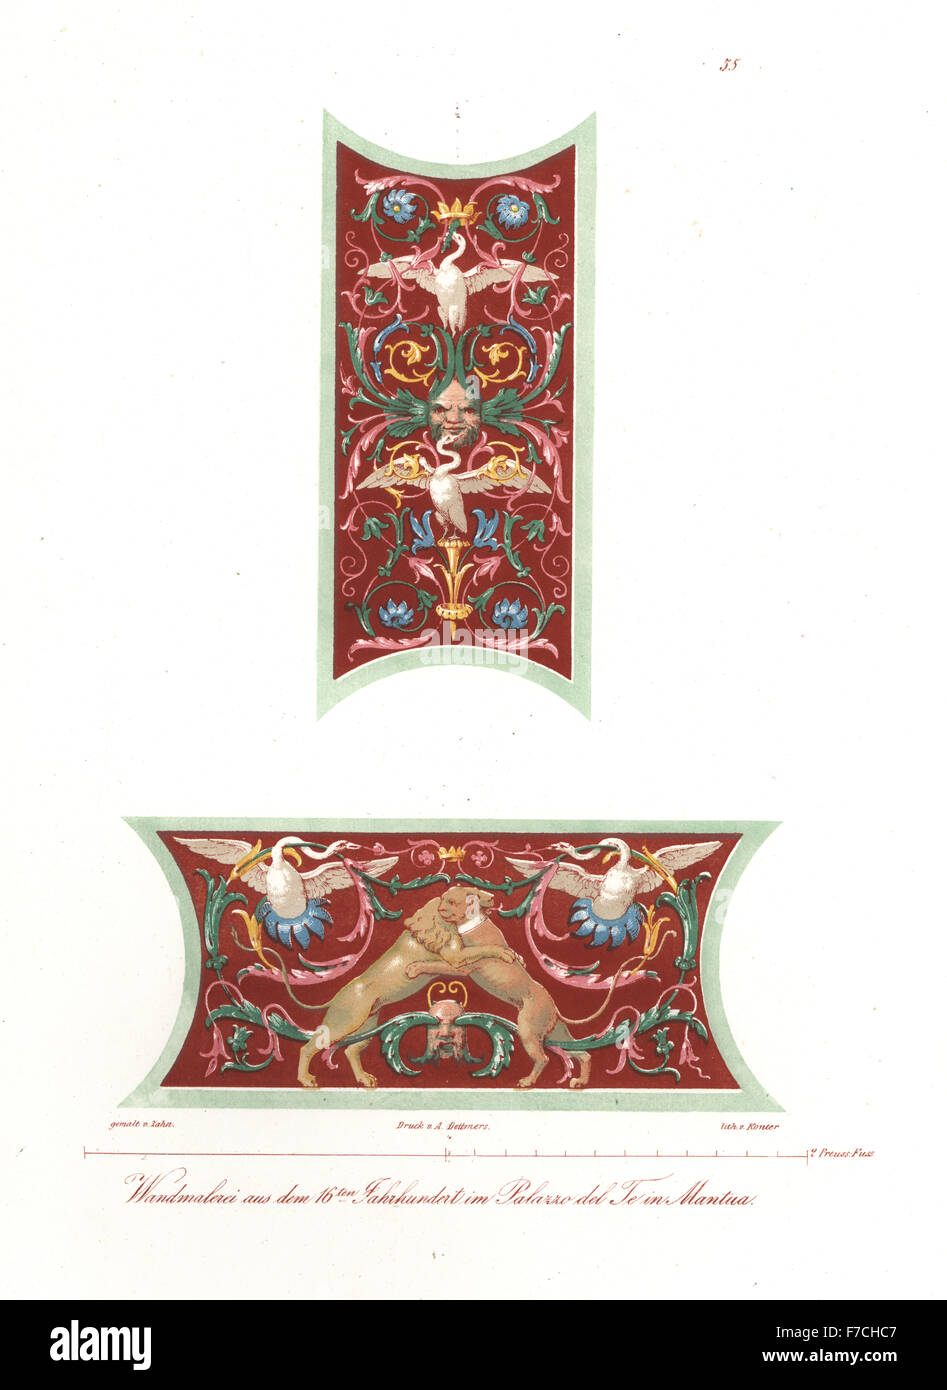 Wall paintings of swans, lions, foliage and masks from the Palazzo del Te, Mantua, Italy, 16th century. Handcoloured lithograph by Konter after an illustration by Wilhelm Zahn from his Ornament of All Classical Art Eras, Ornamente aller klassischen Kunst-Epochen, Reimer, Berlin, 1834. Stock Photo